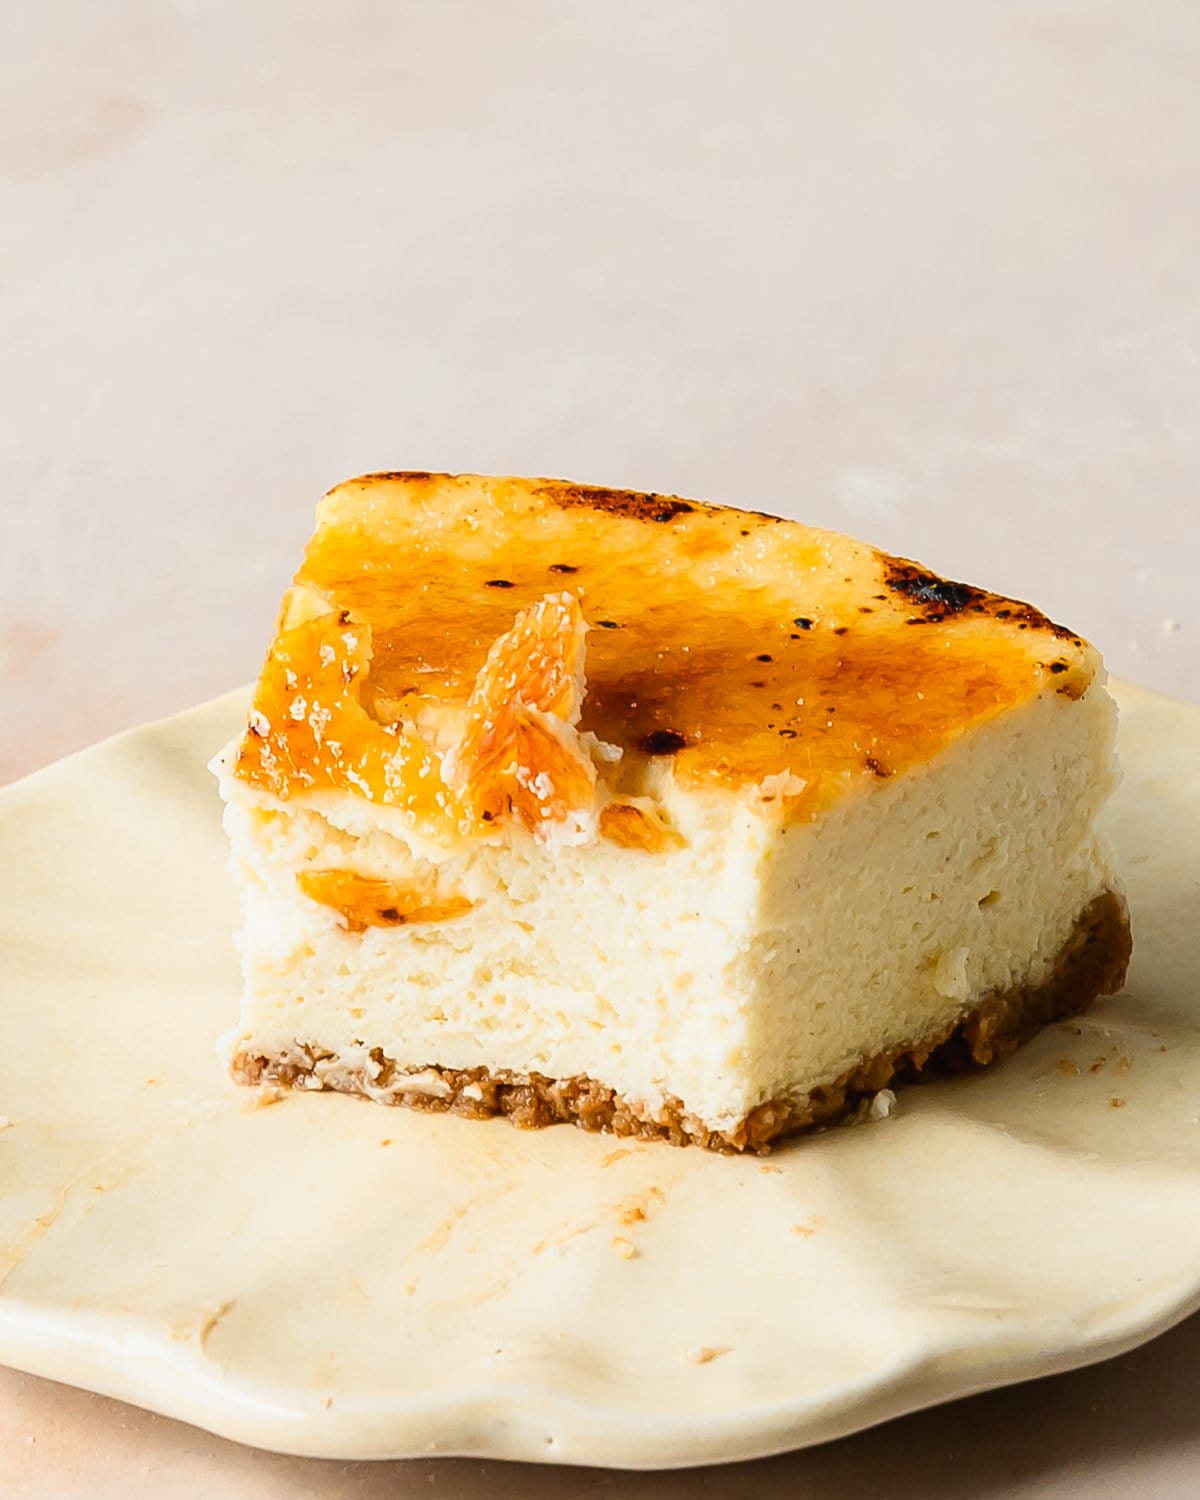 Creme Brulee Cheesecake is a thick, rich and creamy vanilla cheesecake in a graham cracker crust, with a crunchy, golden brown caramelized sugar top. 